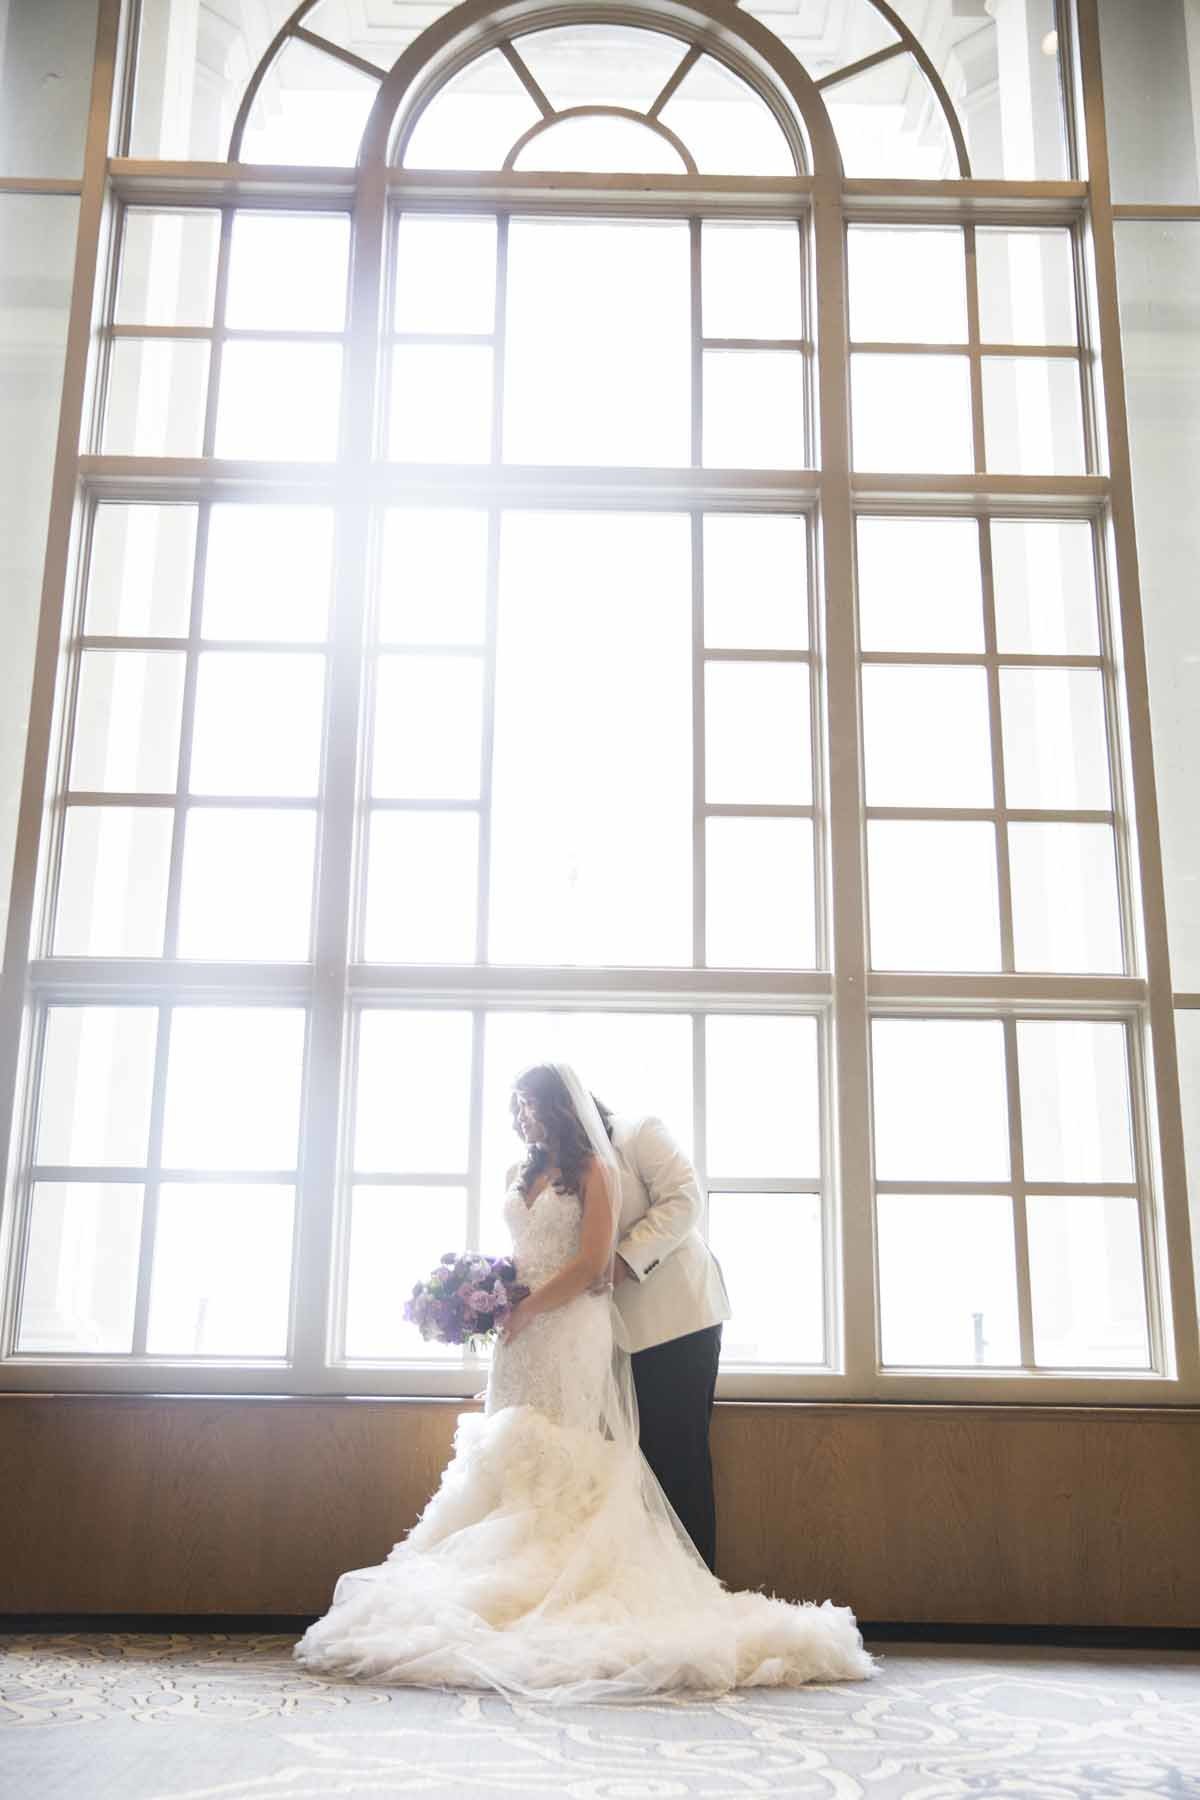 Our bride and groom posing in the sunlight.